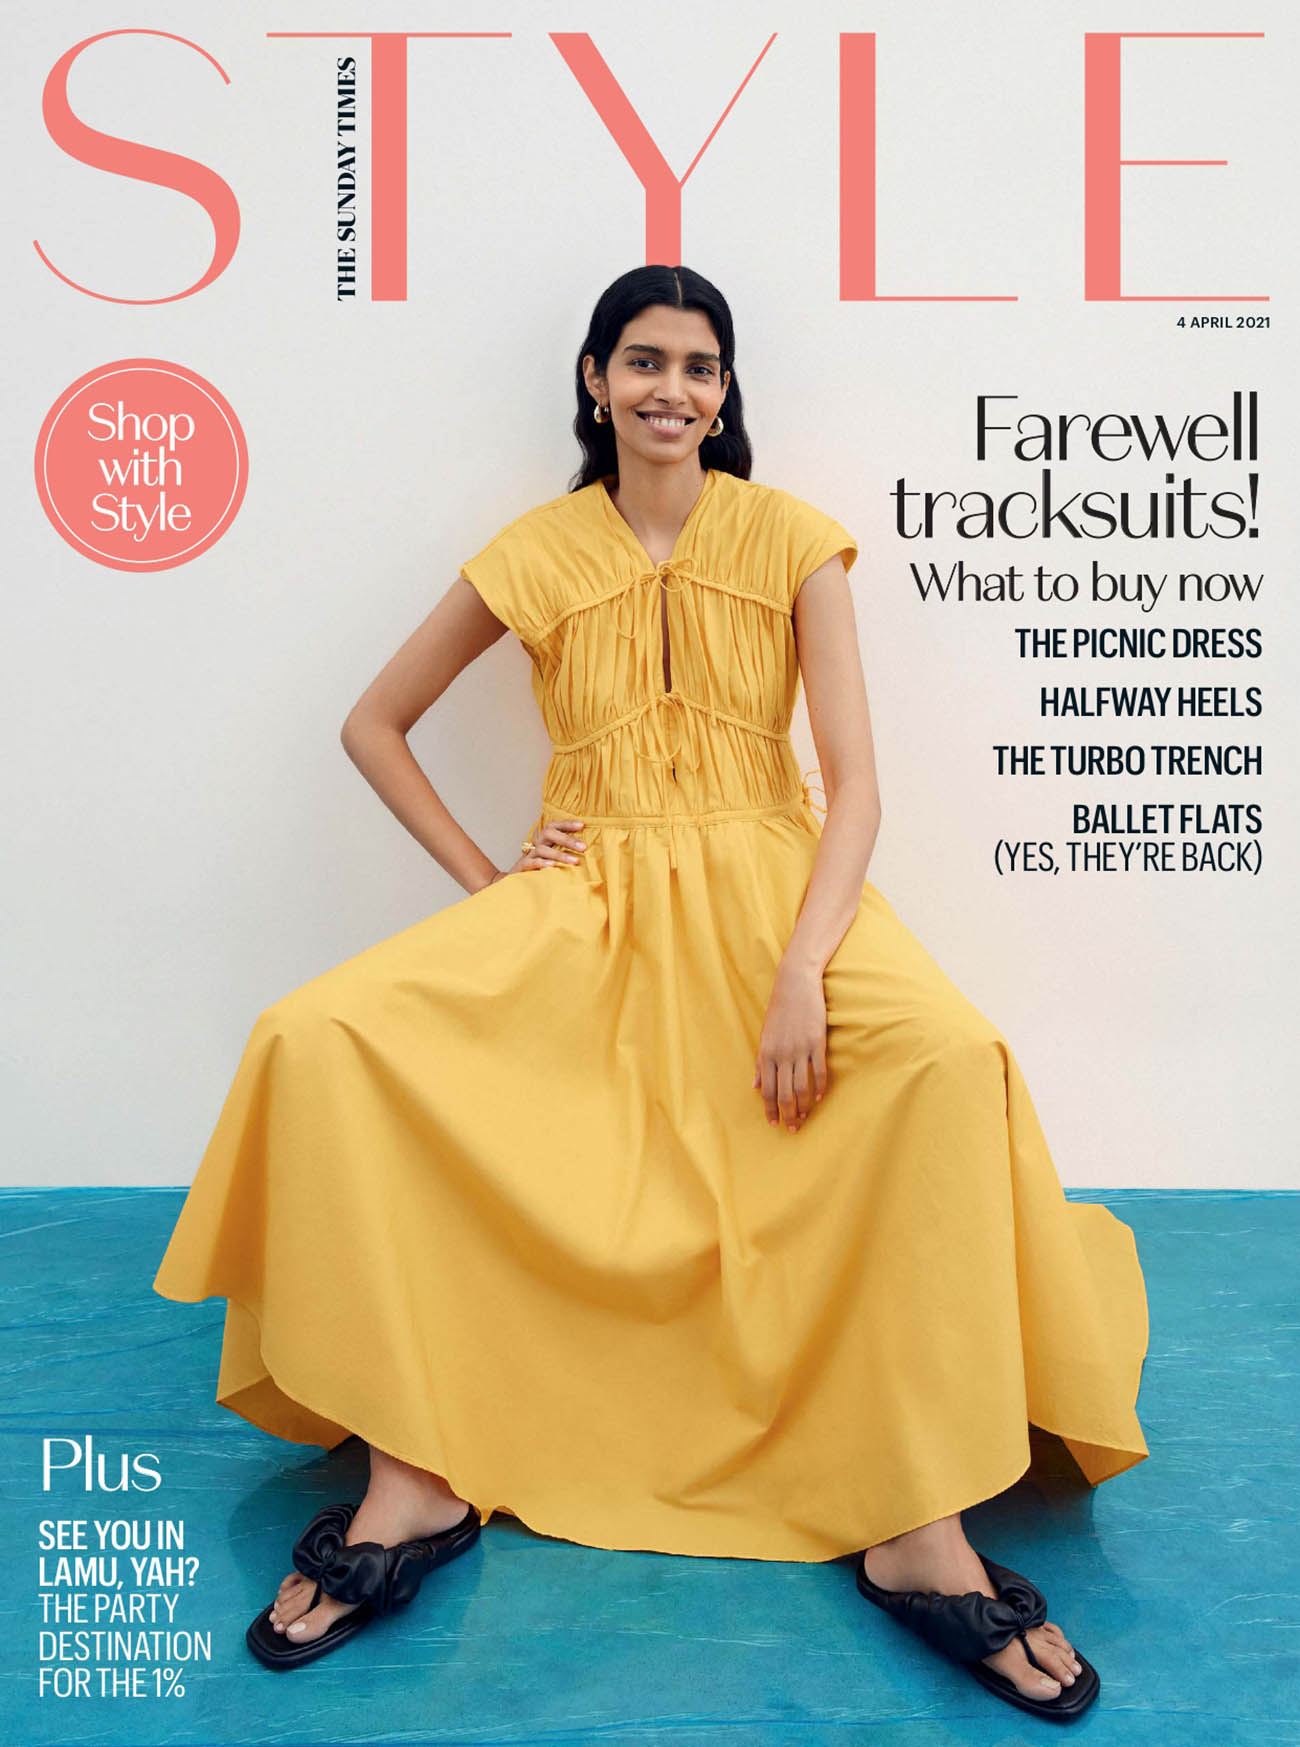 Pooja Mor covers The Sunday Times Style April 4th, 2021 by Georgia Devey Smith